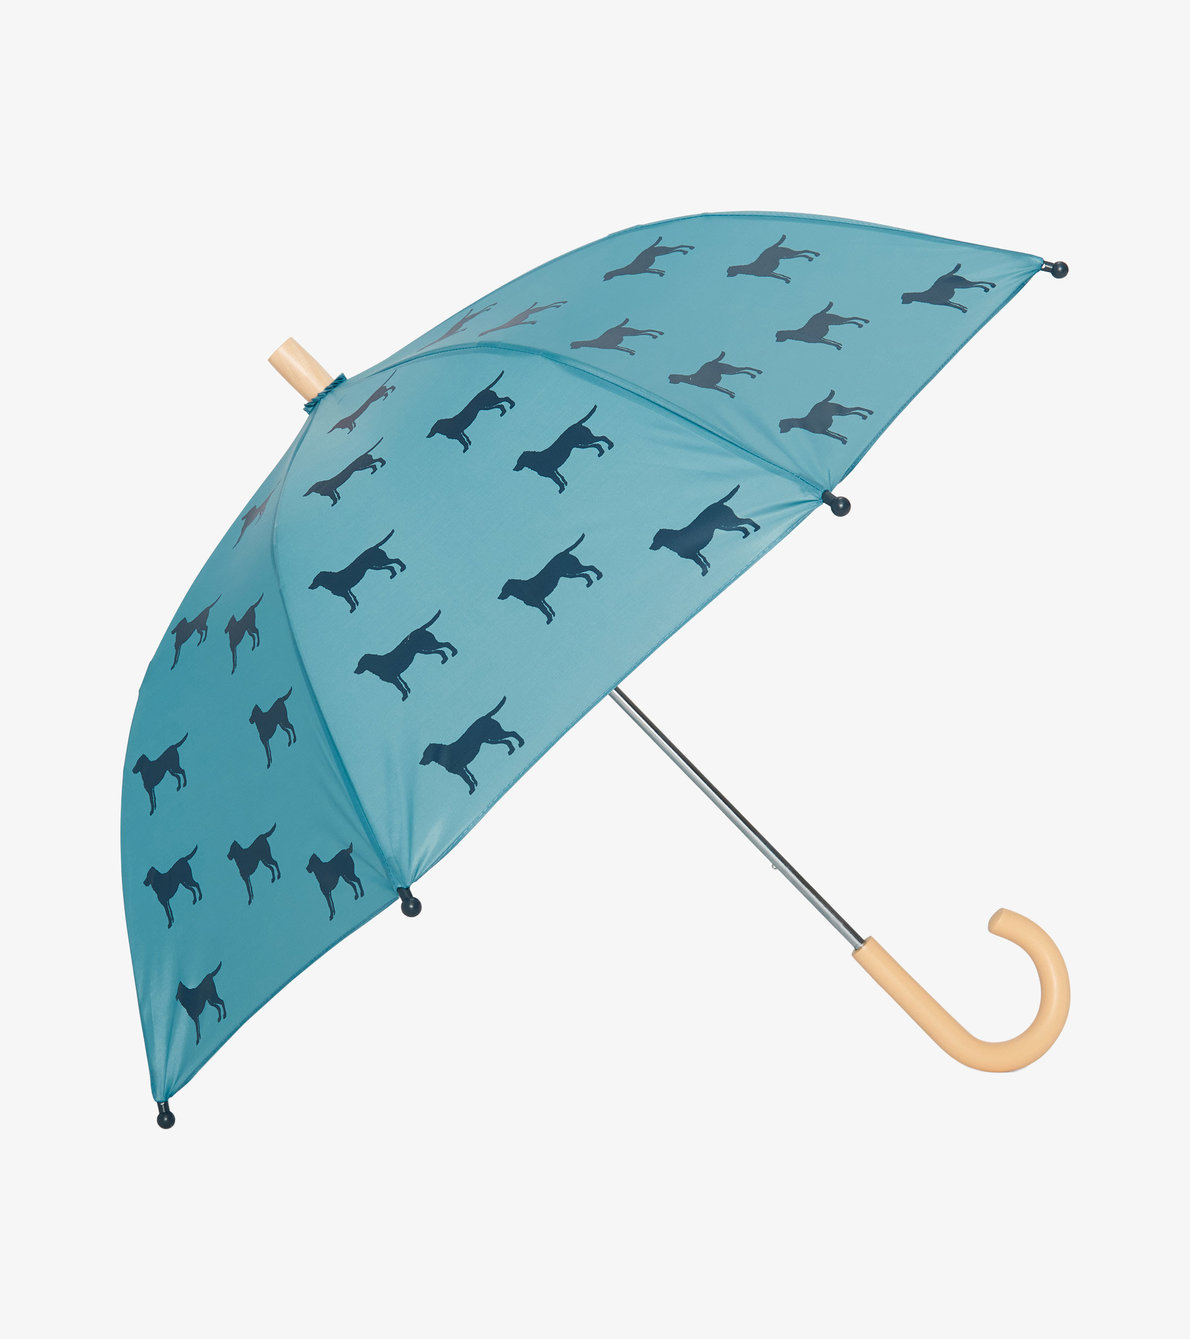 View larger image of Preppy Dogs Umbrella